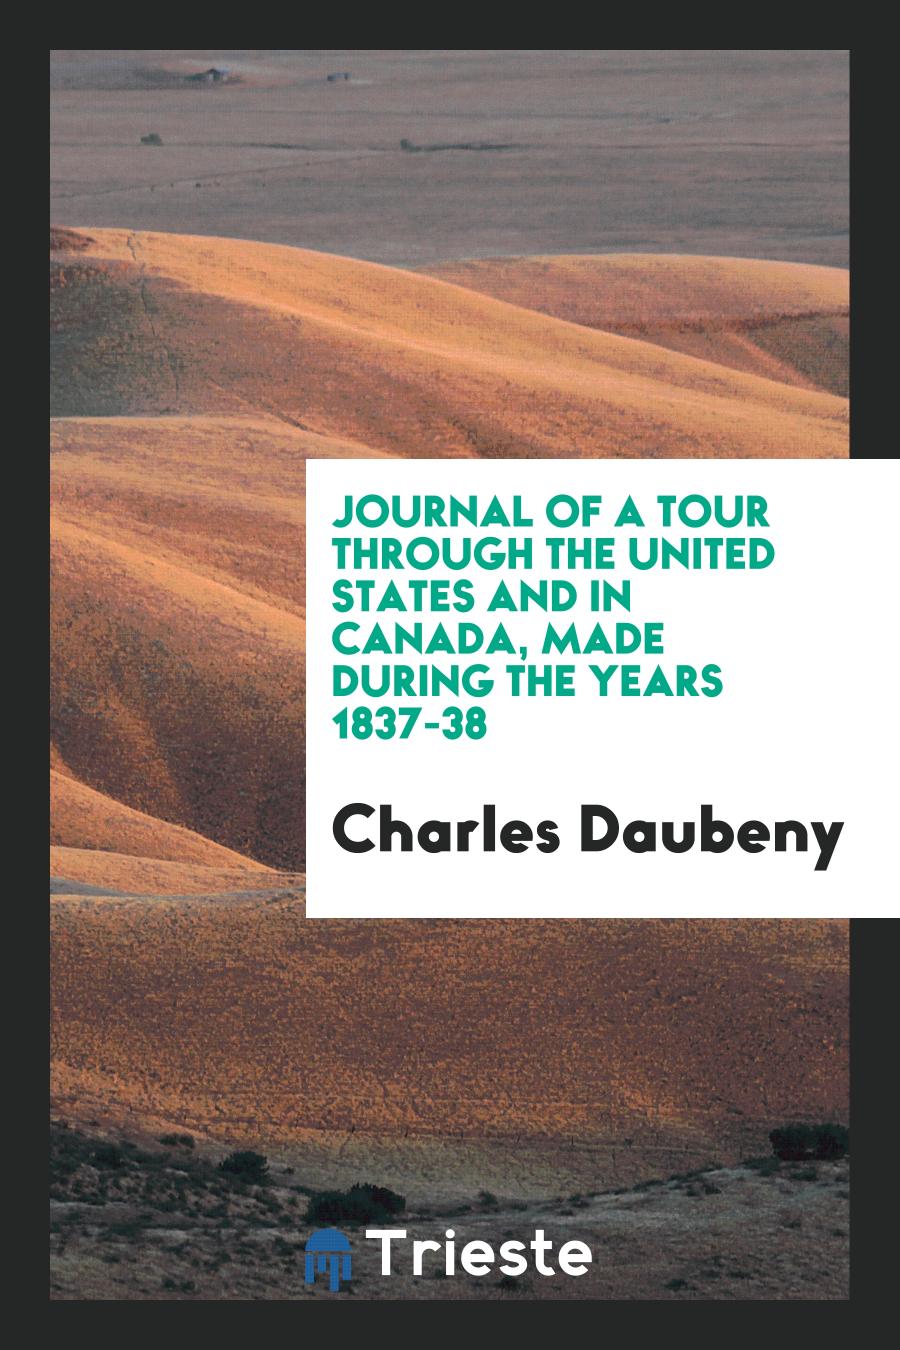 Journal of a Tour through the United States and in Canada, Made during the Years 1837-38